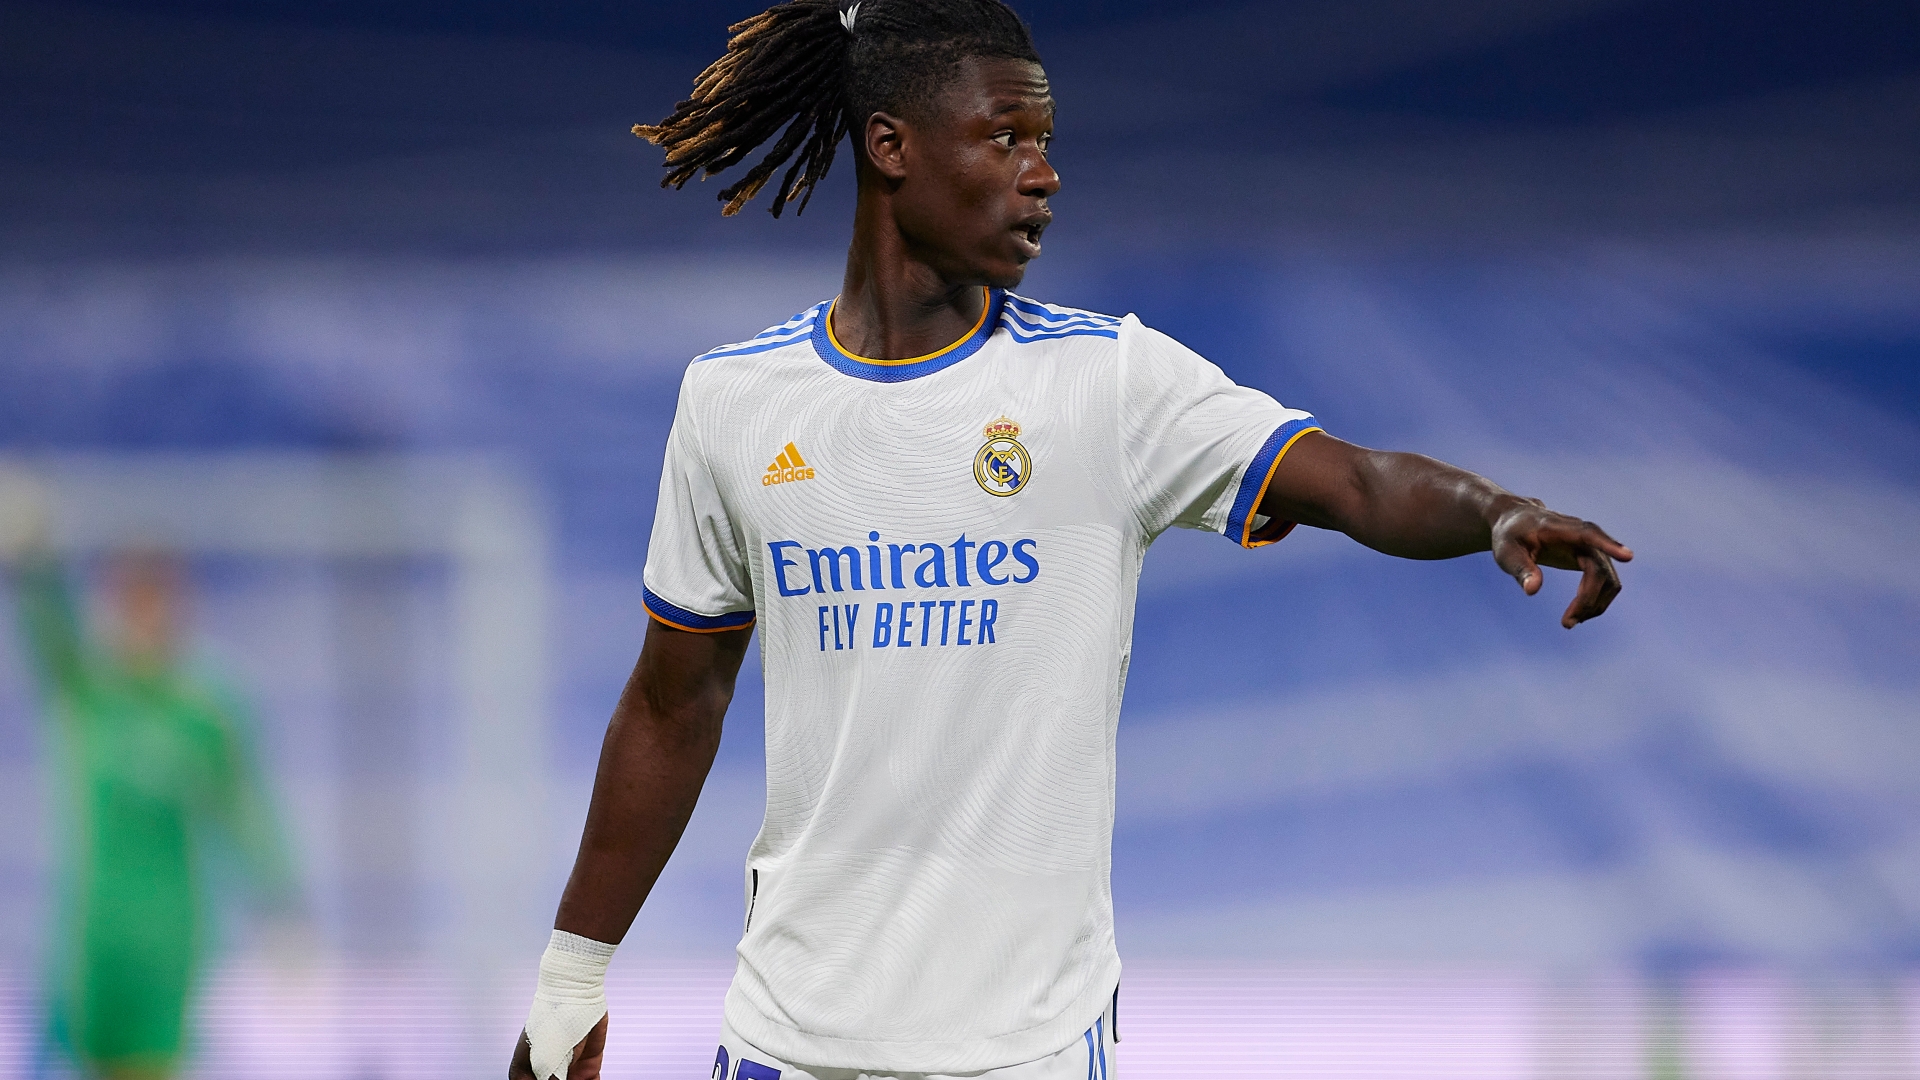 Who is Eduardo Camavinga? The former Liverpool target spurred on by home burning down can be Real Madrid's Champions League hero and was hailed by Man United's Paul Pogba and Hatem Ben